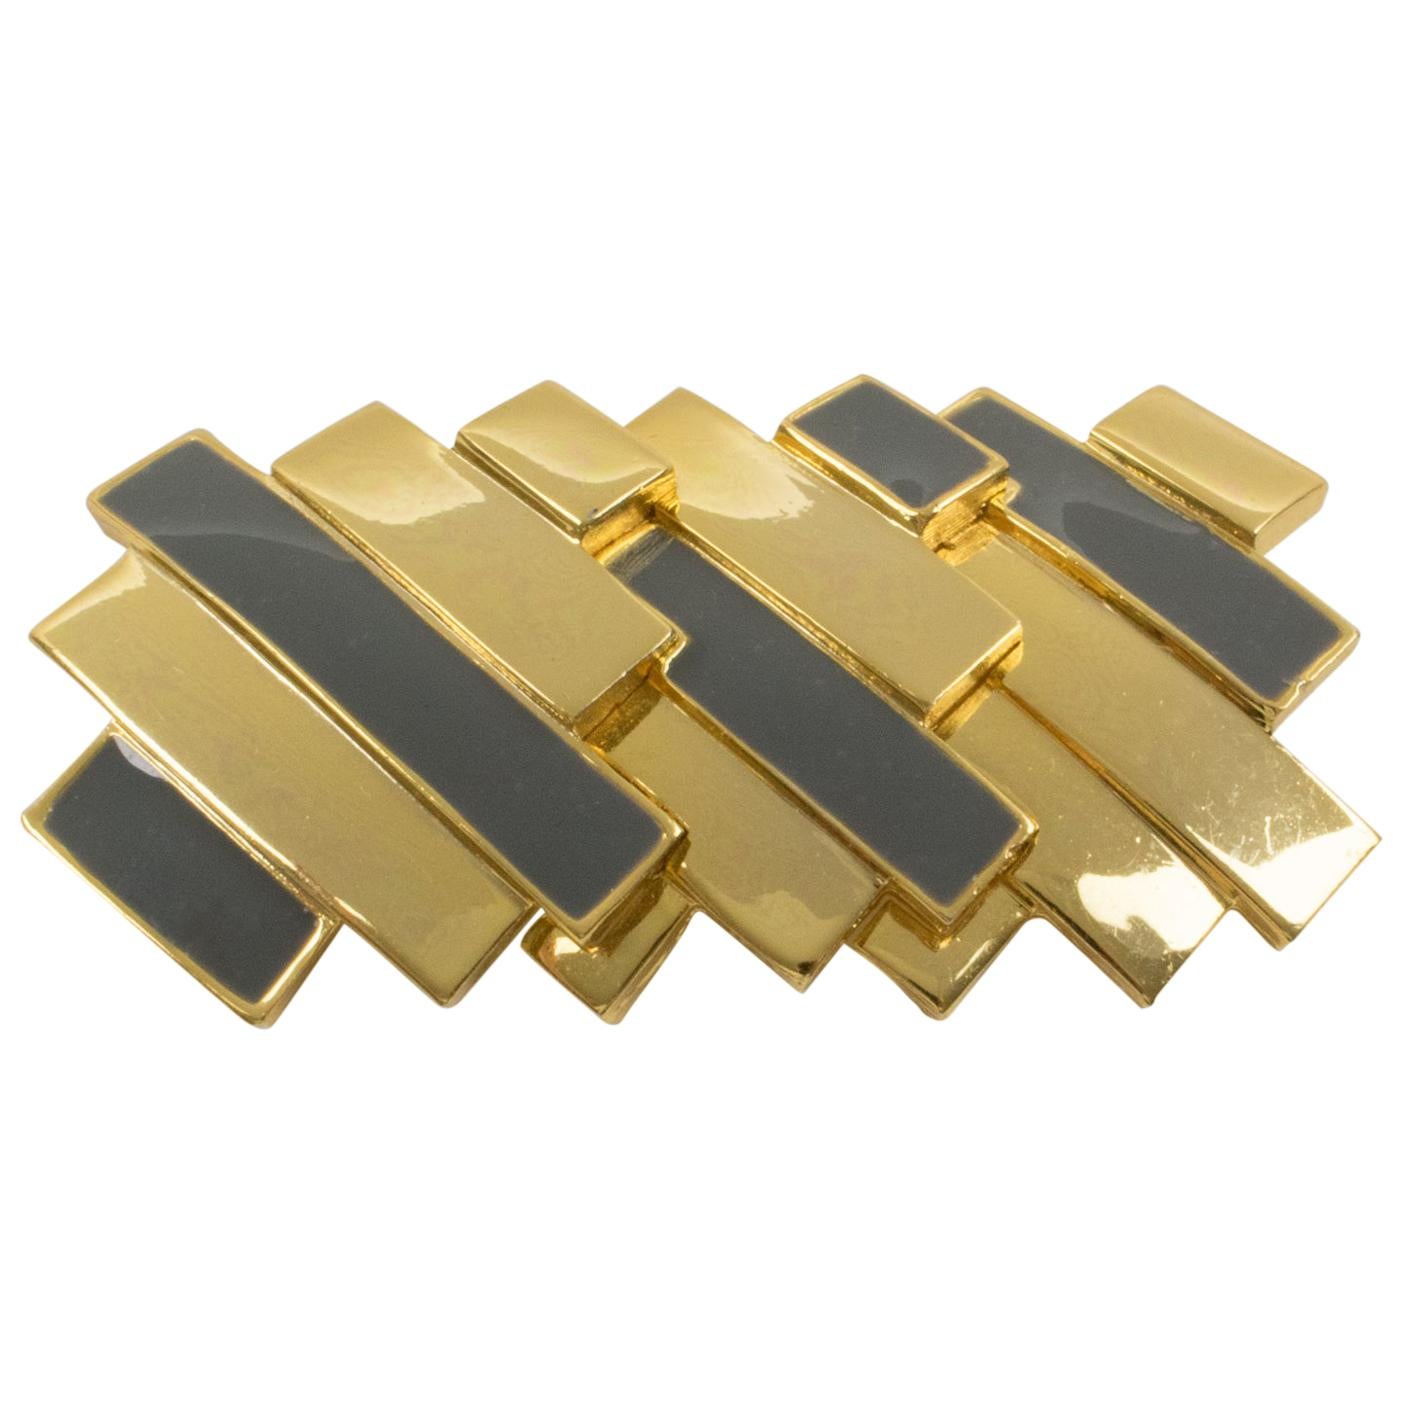 This stunning Lanvin Paris modernist pin brooch is a statement piece from the early 1970s featuring a massive gilded metal carved design in futuristic geometric and dimensional shape compliments with gray enamel. The security closing clasp and the